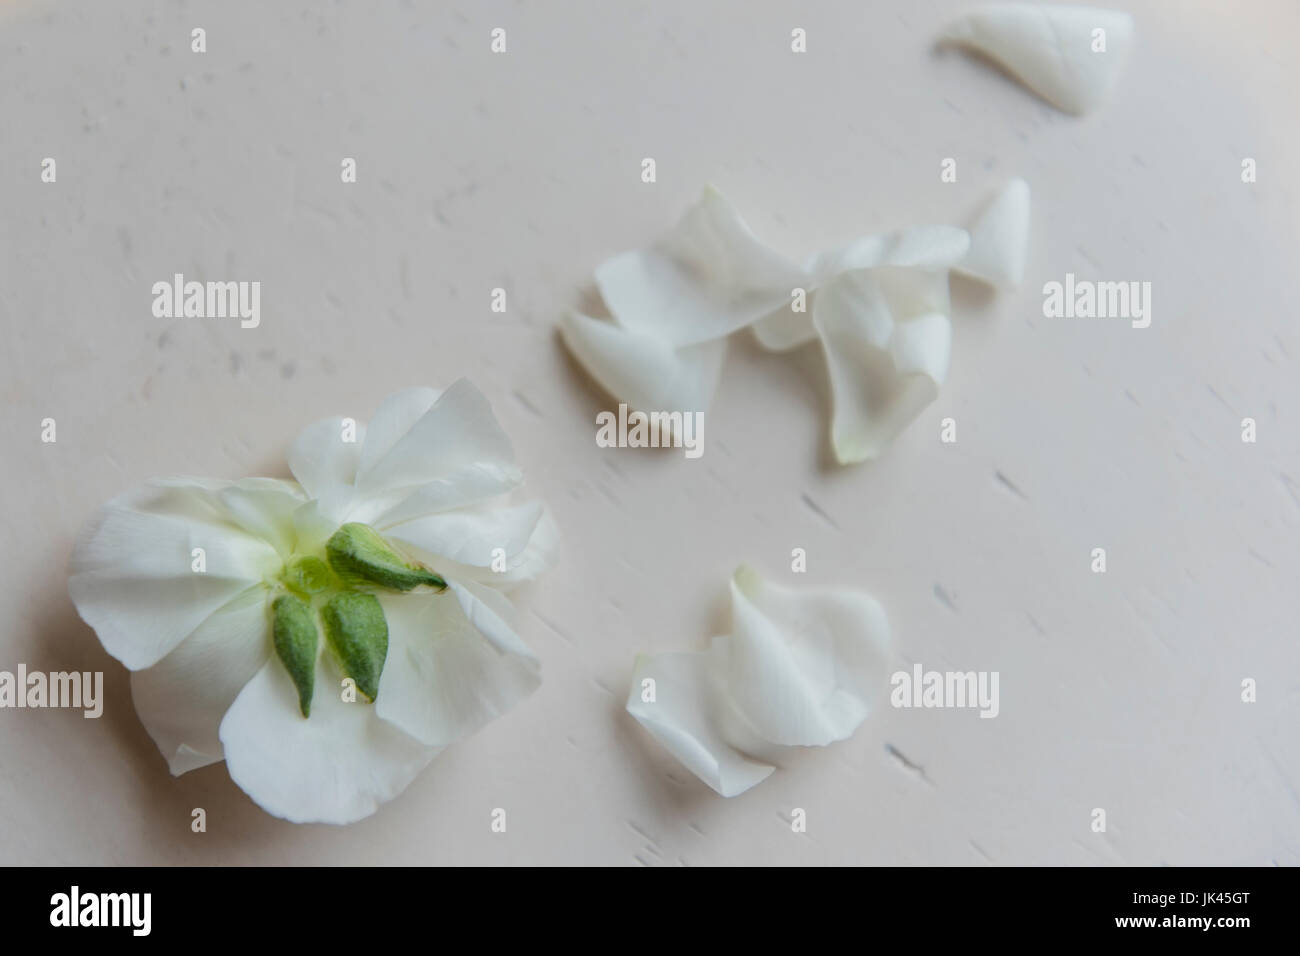 White flower petals on table Stock Photo